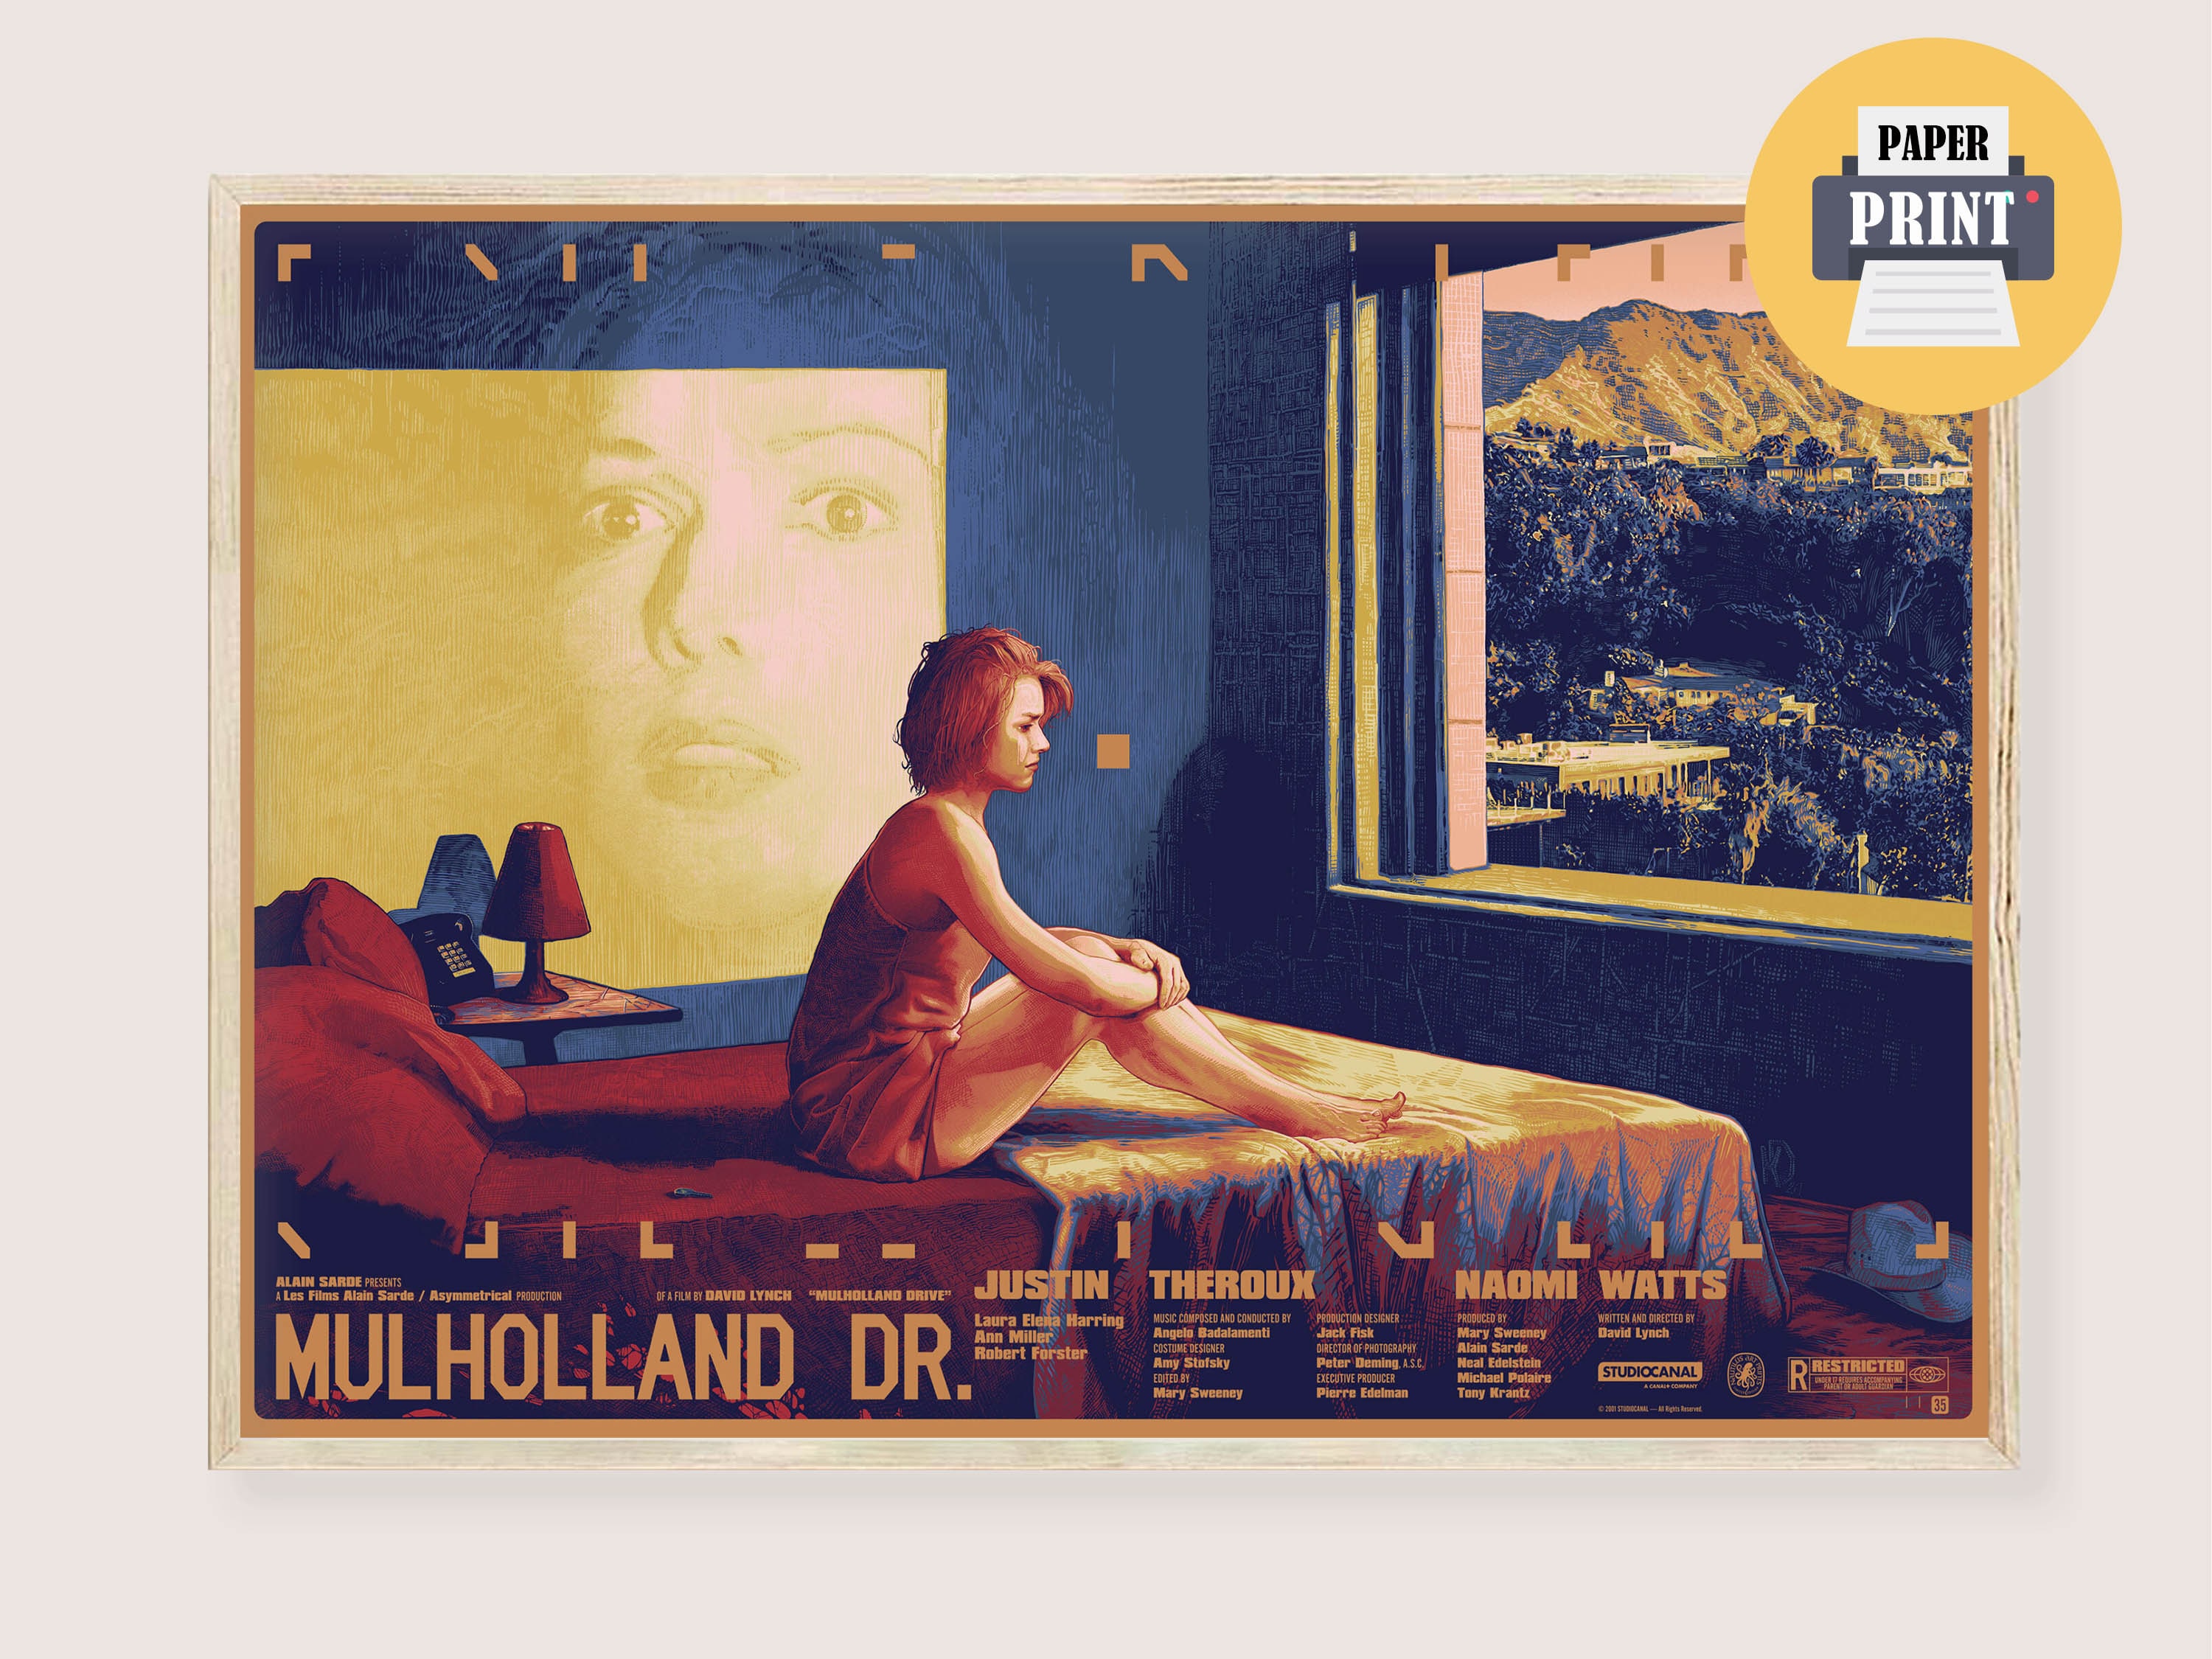  OFITIN Mulholland Drive Movie Vintage Art Poster Canvas Art  Poster and Wall Art Picture Print Modern Family bedroom Decor Posters  08x12inch(20x30cm): Posters & Prints